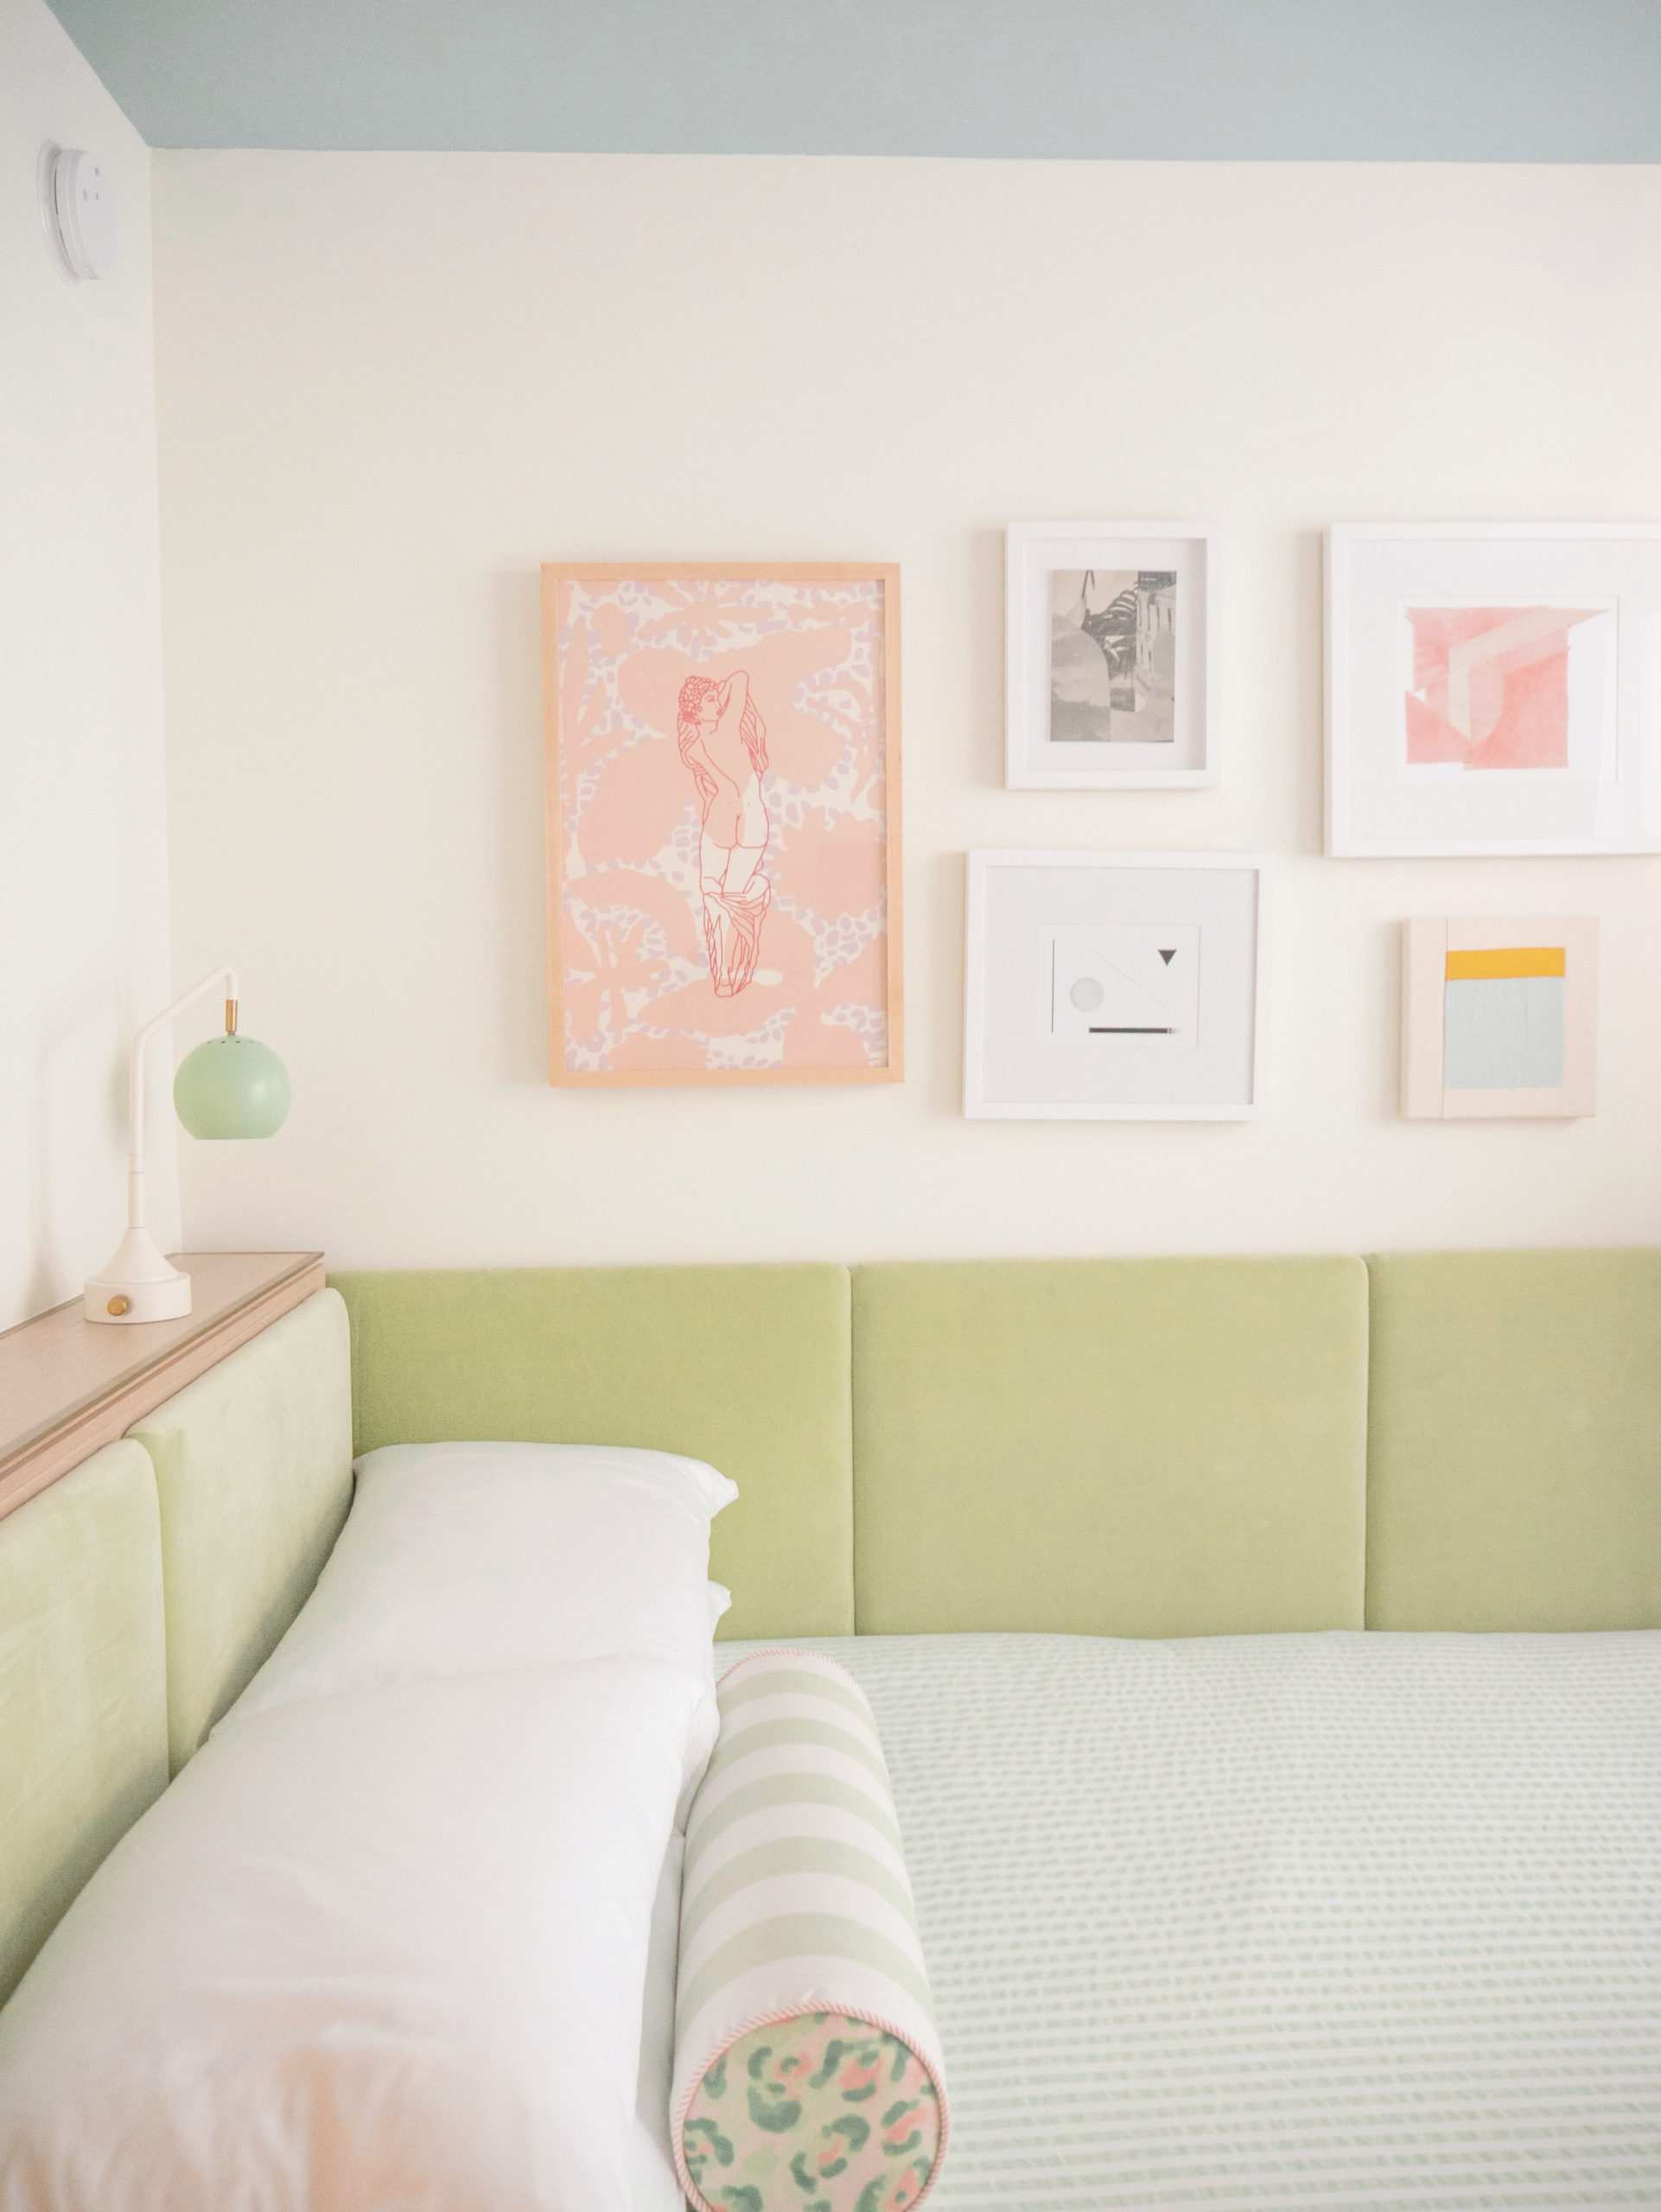 The Good Time Hotel, Cozy Queen Room. Hotel Lifestyle Photography by Hopeful Outsiders